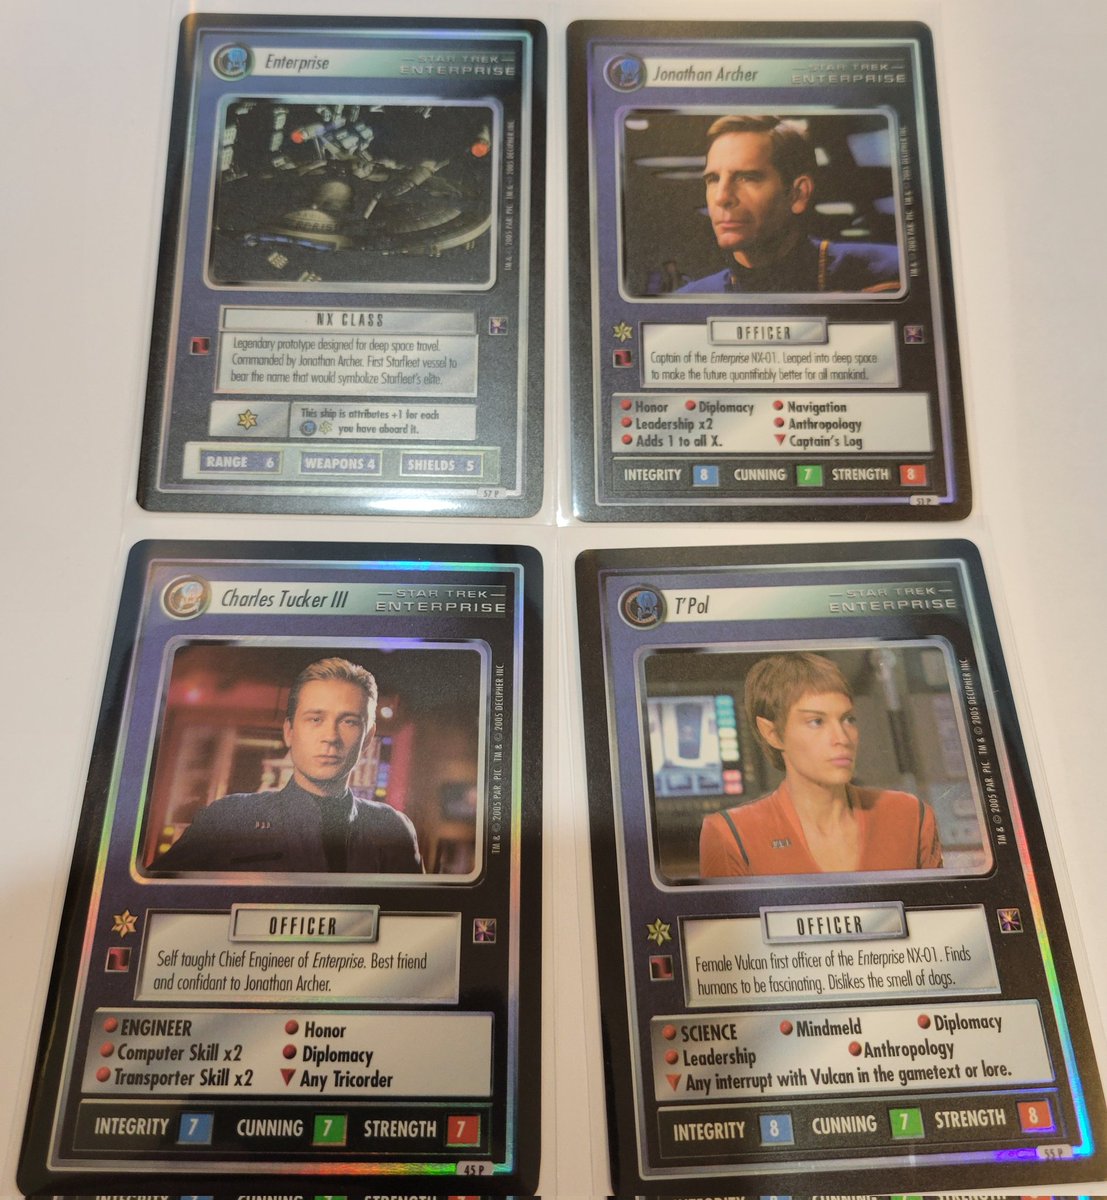 Some really nice buylists were just added including a full Enterprise Collection for Star Trek.

#startrek #enterprise  #StCCG  #Outofprint #ClassicCardGames #categoryonegames #TCG #CCG #oldtcgs #oldccg #deadtcgs #deadtcgcollector #deadtcg #deadccg #deadccgfan #deadccgs  #oldtcg